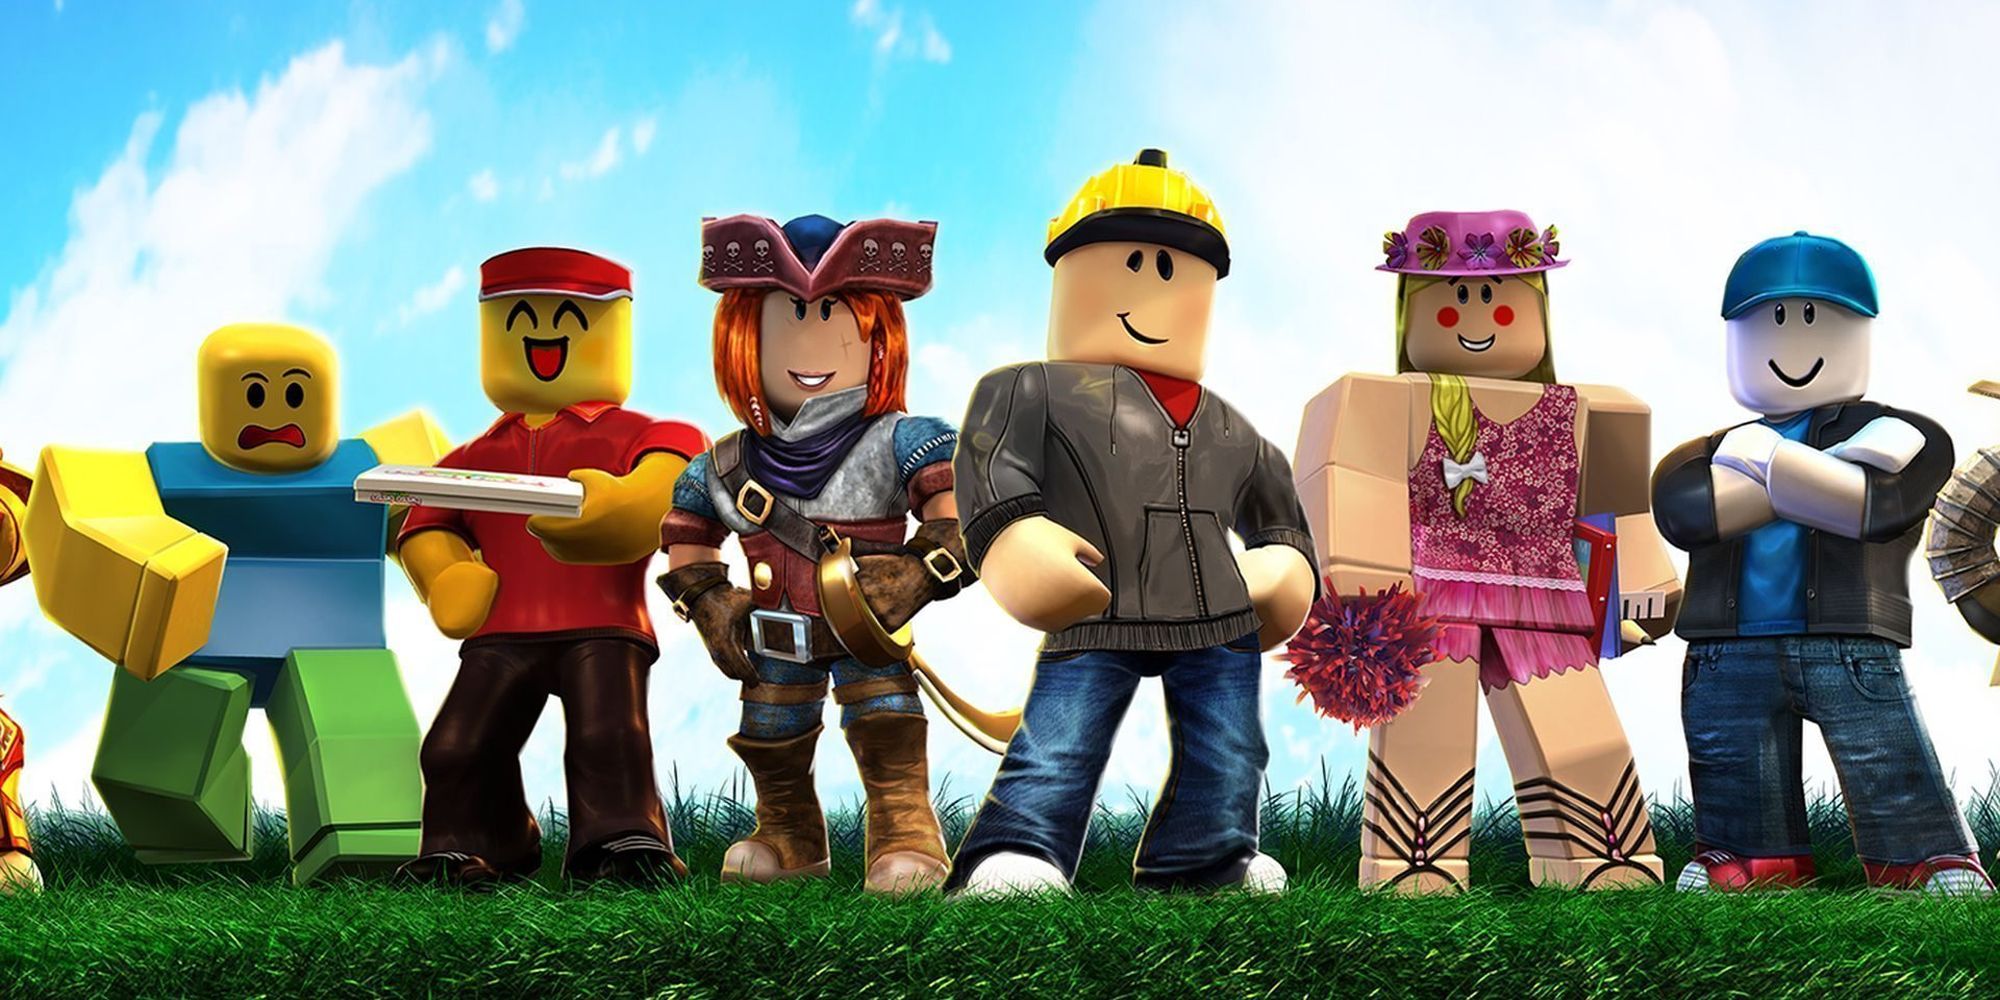 Advertising watchdog slams Roblox because of paid-for influencers shilling  Robux without disclosure 'children can understand